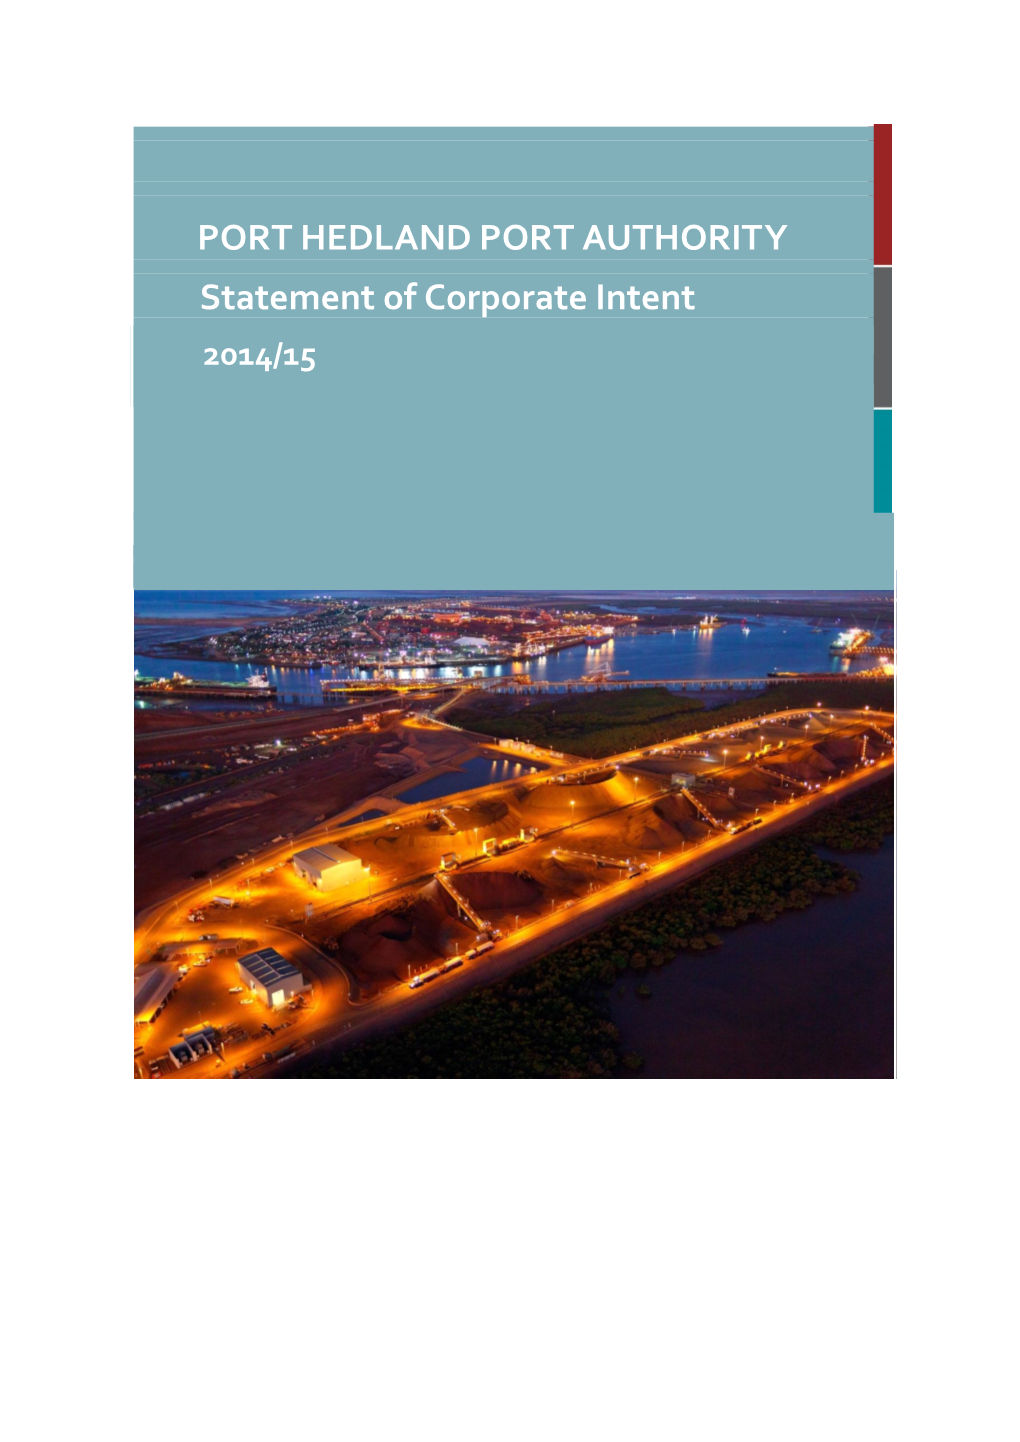 PORT HEDLAND PORT AUTHORITY Statement of Corporate Intent